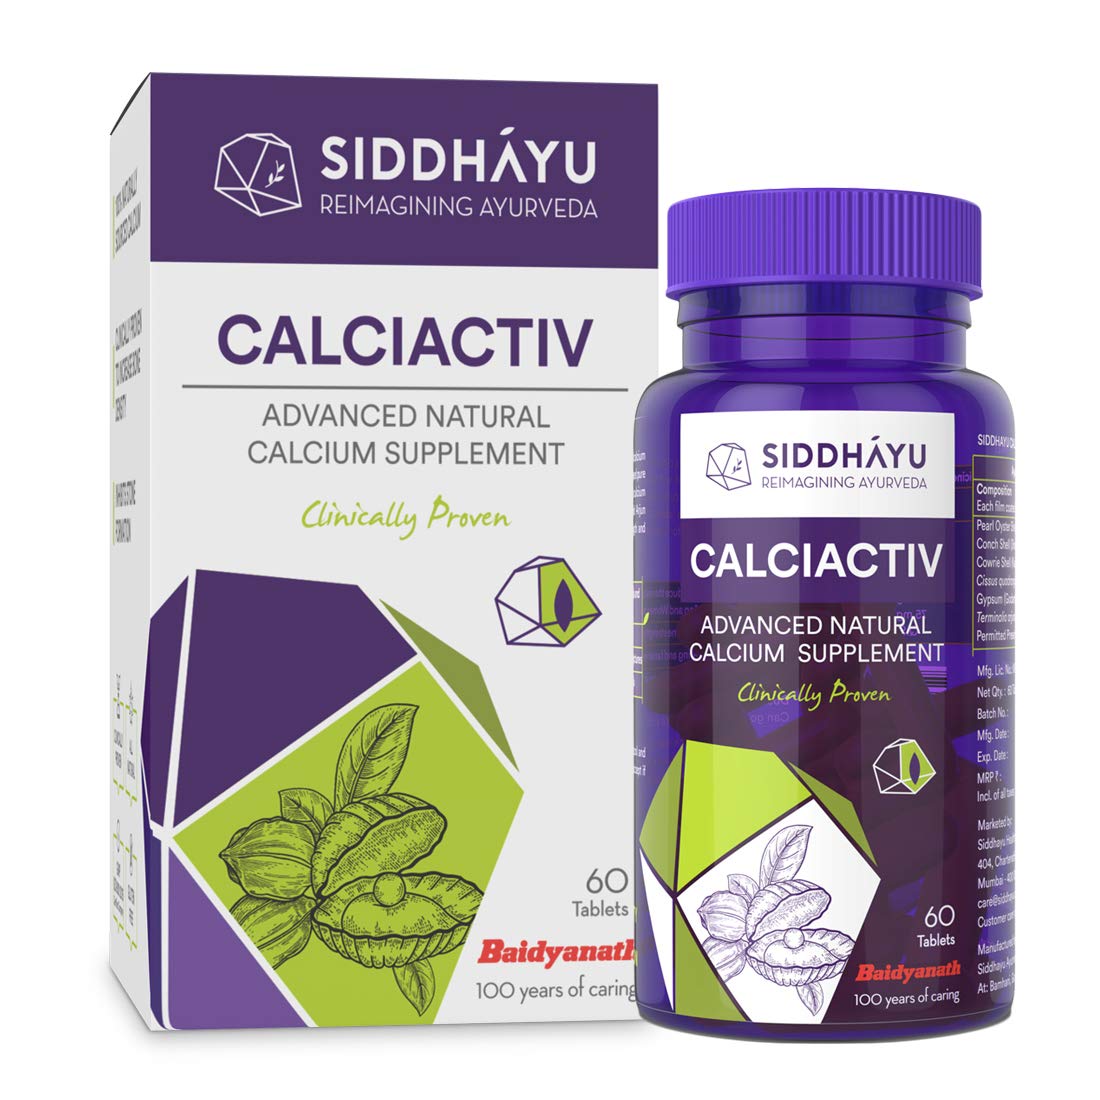 Buy Siddhayu Calciactiv Advanced Natural Calcium Supplement, 60 Tablets Online